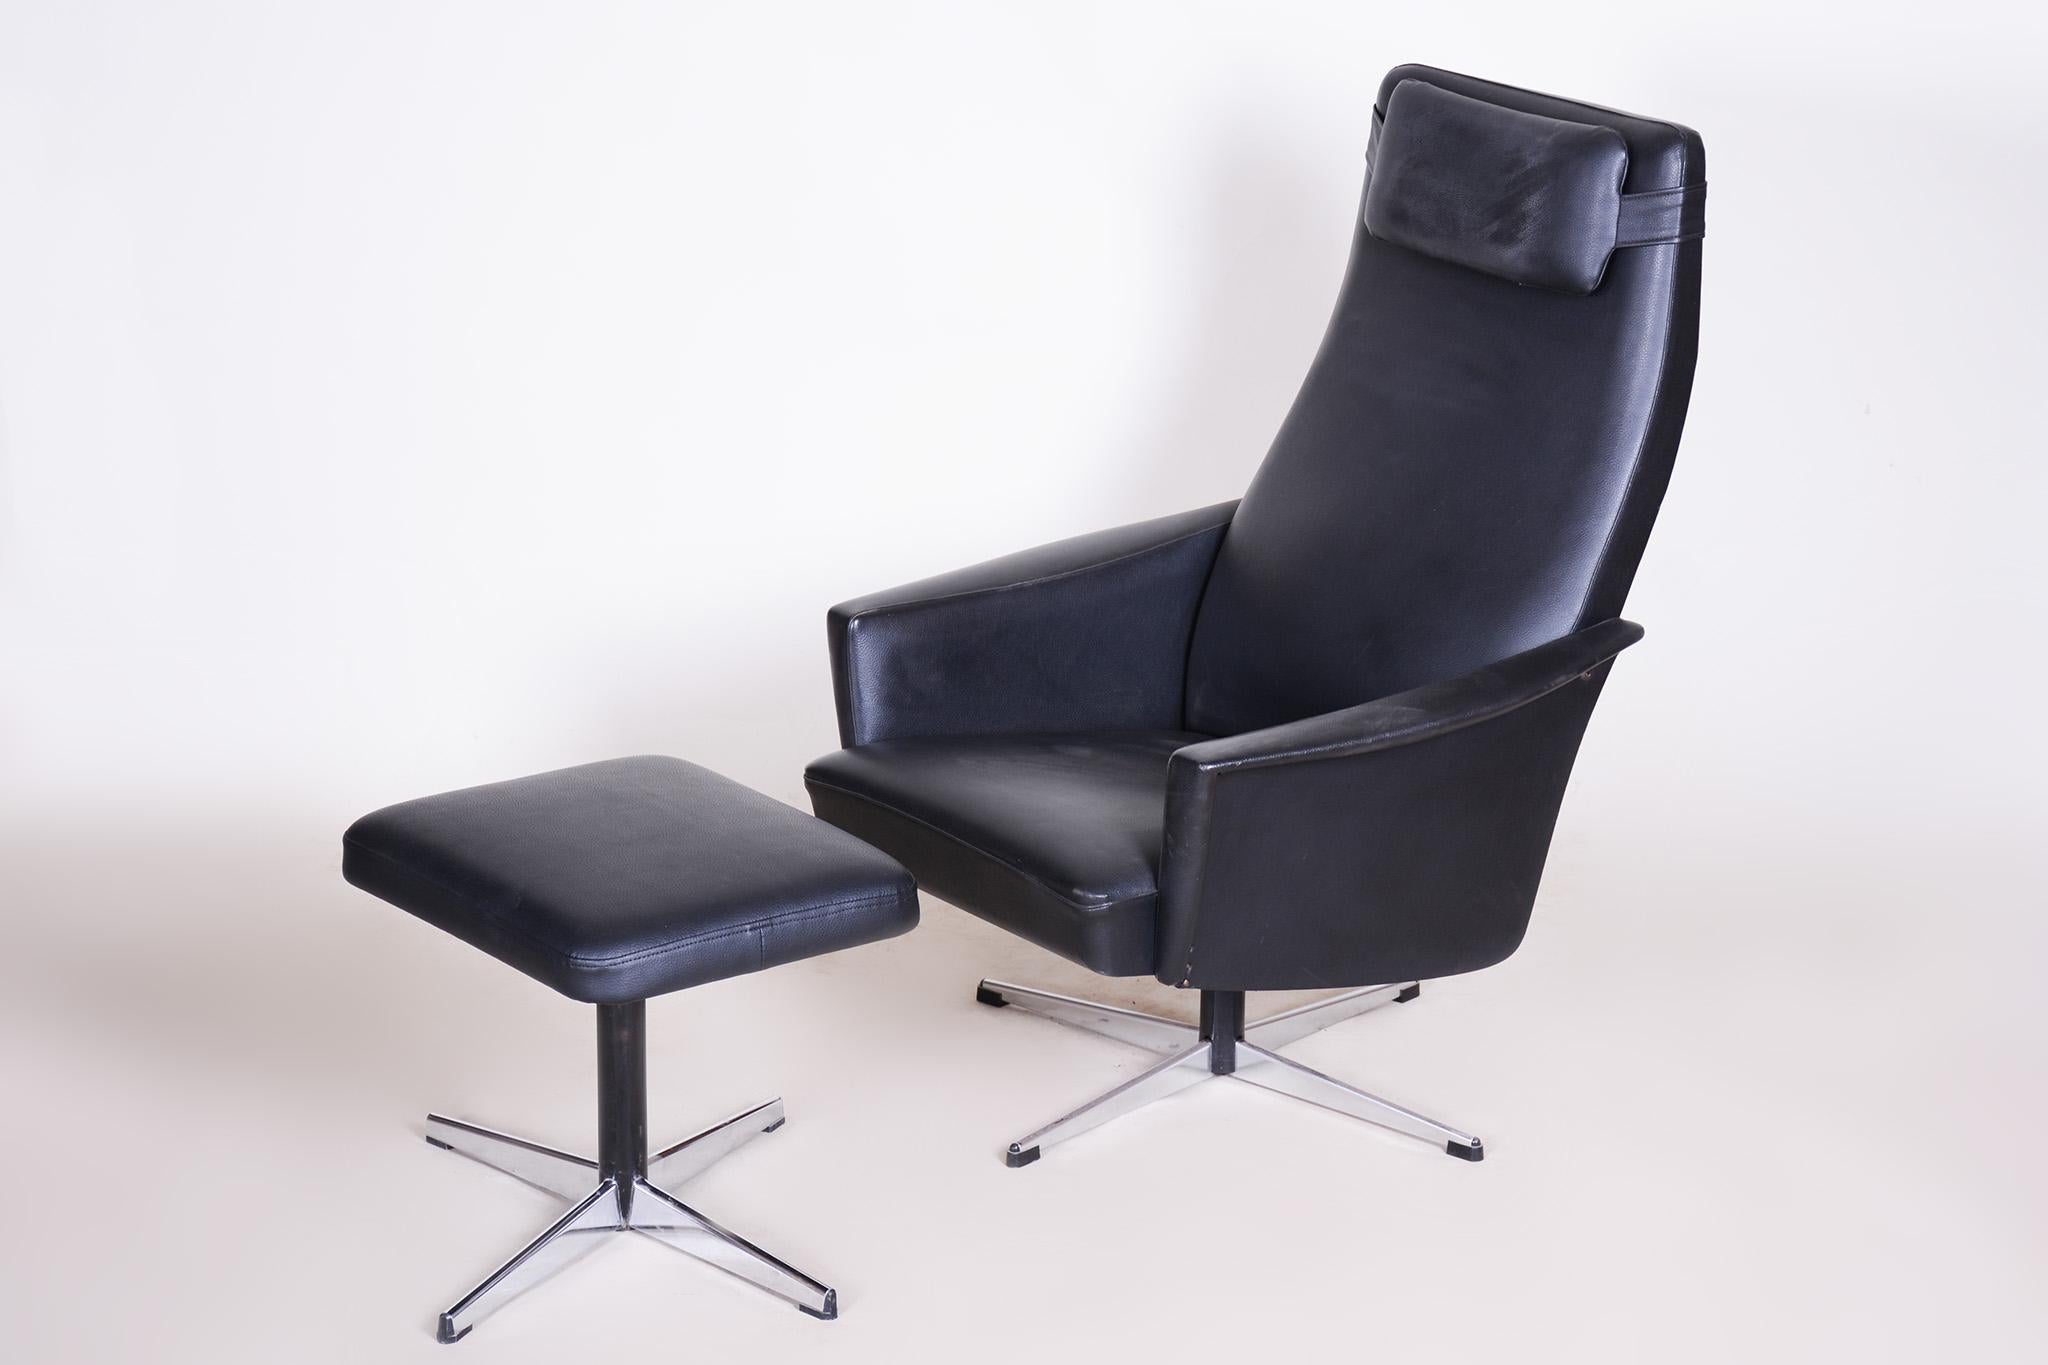 Steel Vegan Leather Bauhaus Swivel Chair with Foot Stool, Made in 1960s Czechia For Sale